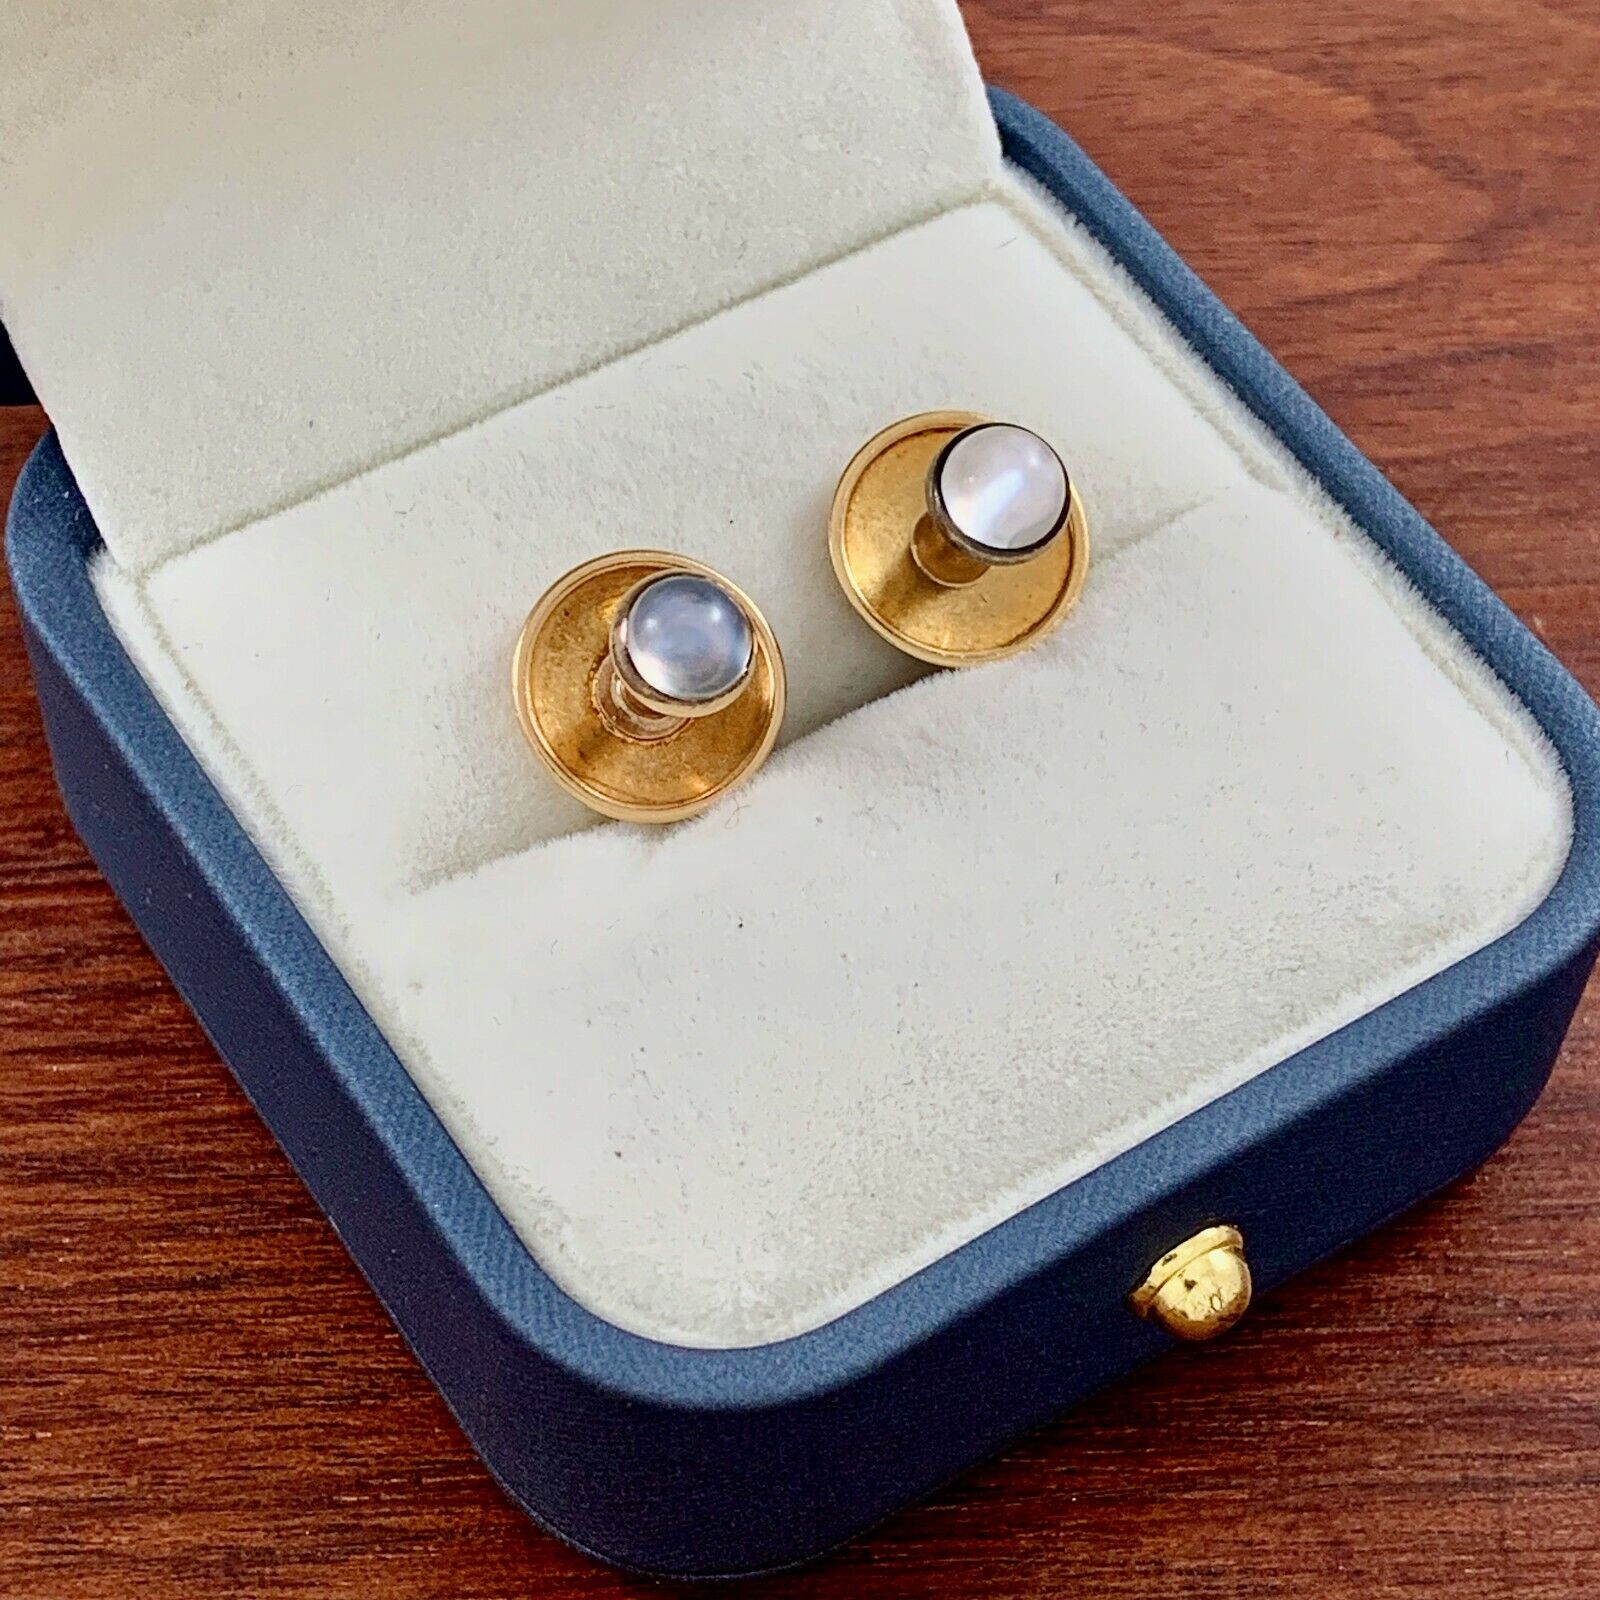 ANTIQUE TIFFANY & CO. 18K YELLOW GOLD & MOONSTONE BUTTONS 